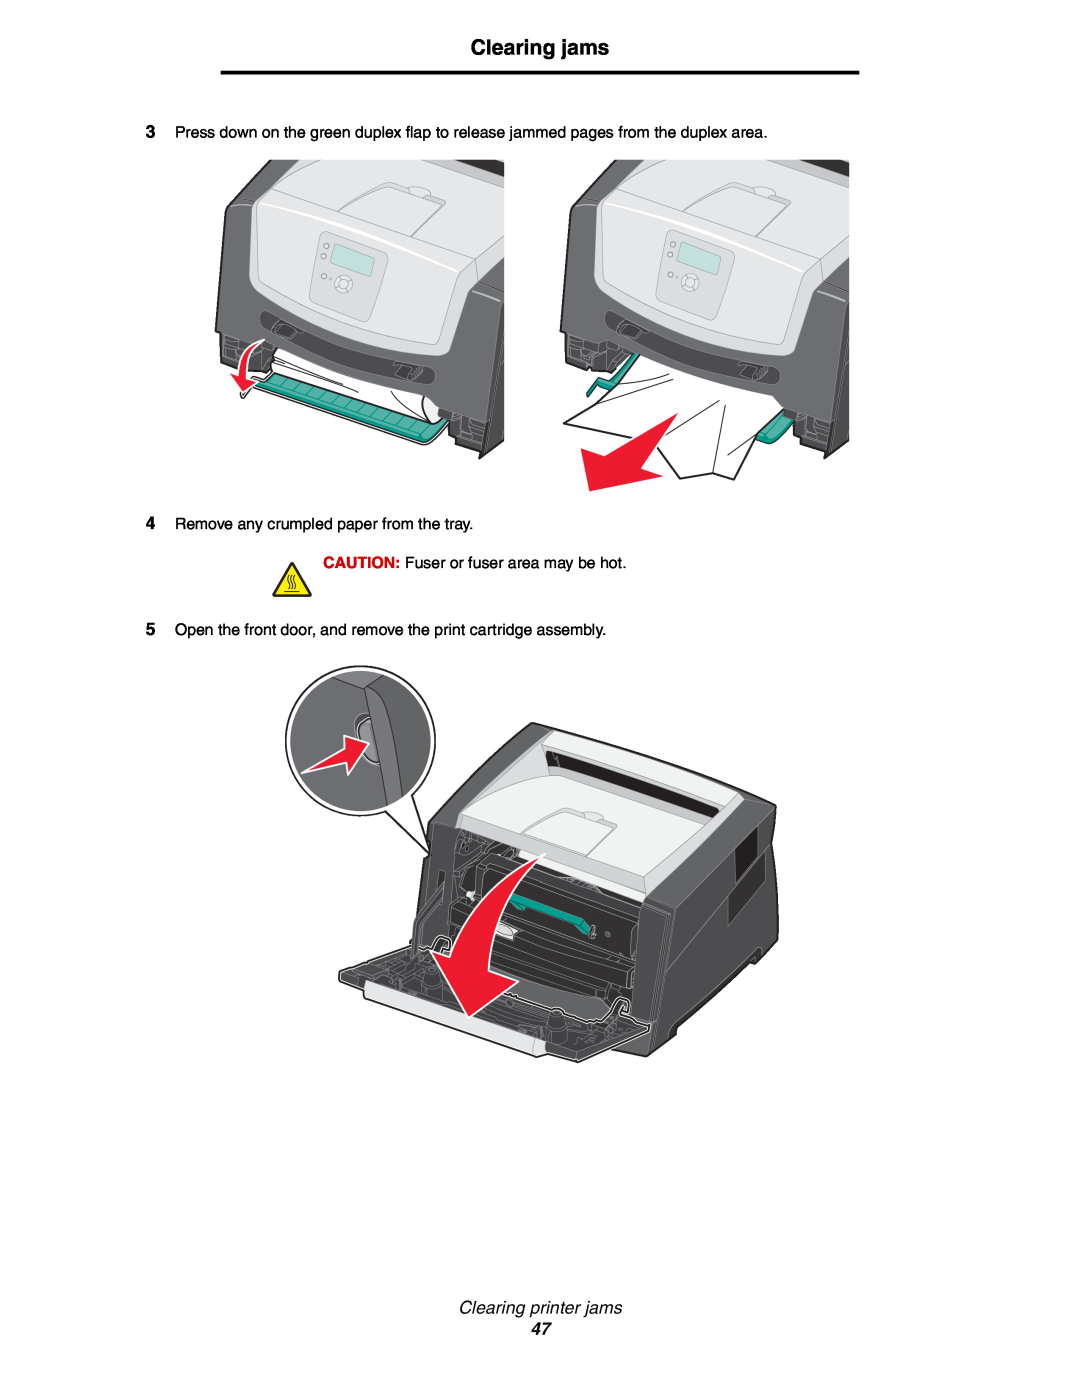 Lexmark 450dn manual Clearing jams, Clearing printer jams, Remove any crumpled paper from the tray 